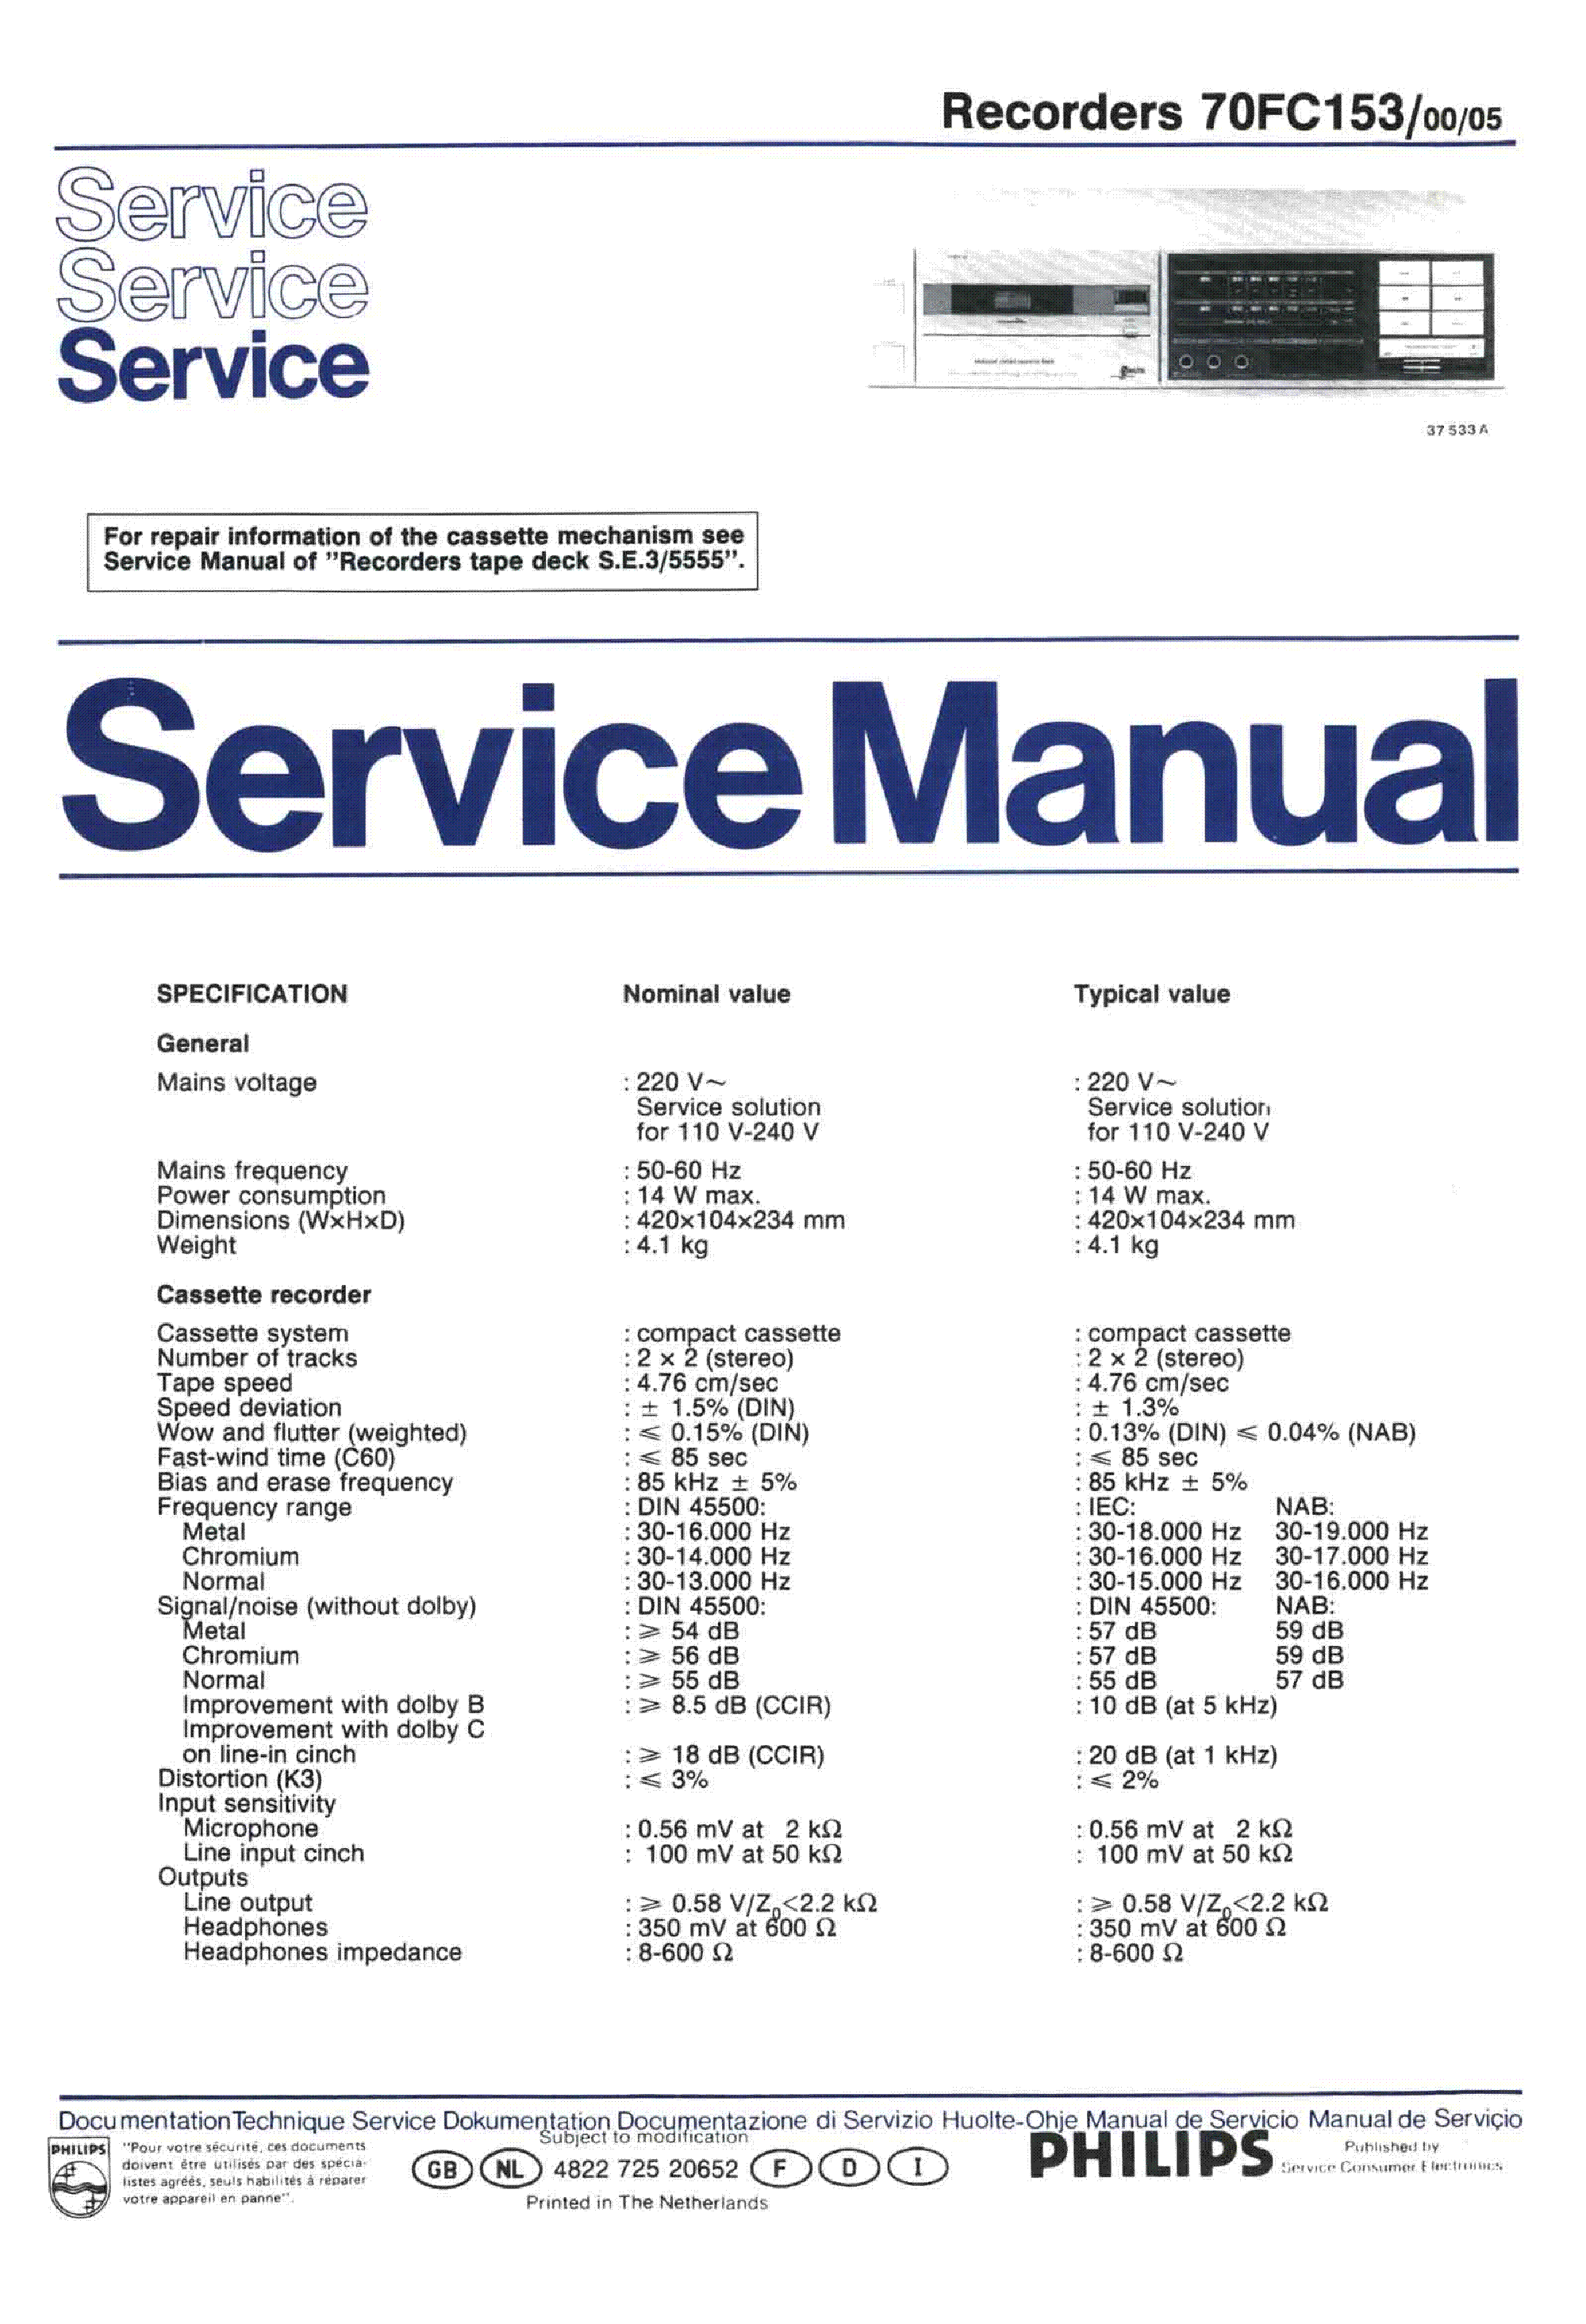 PHILIPS 70FC153 service manual (1st page)